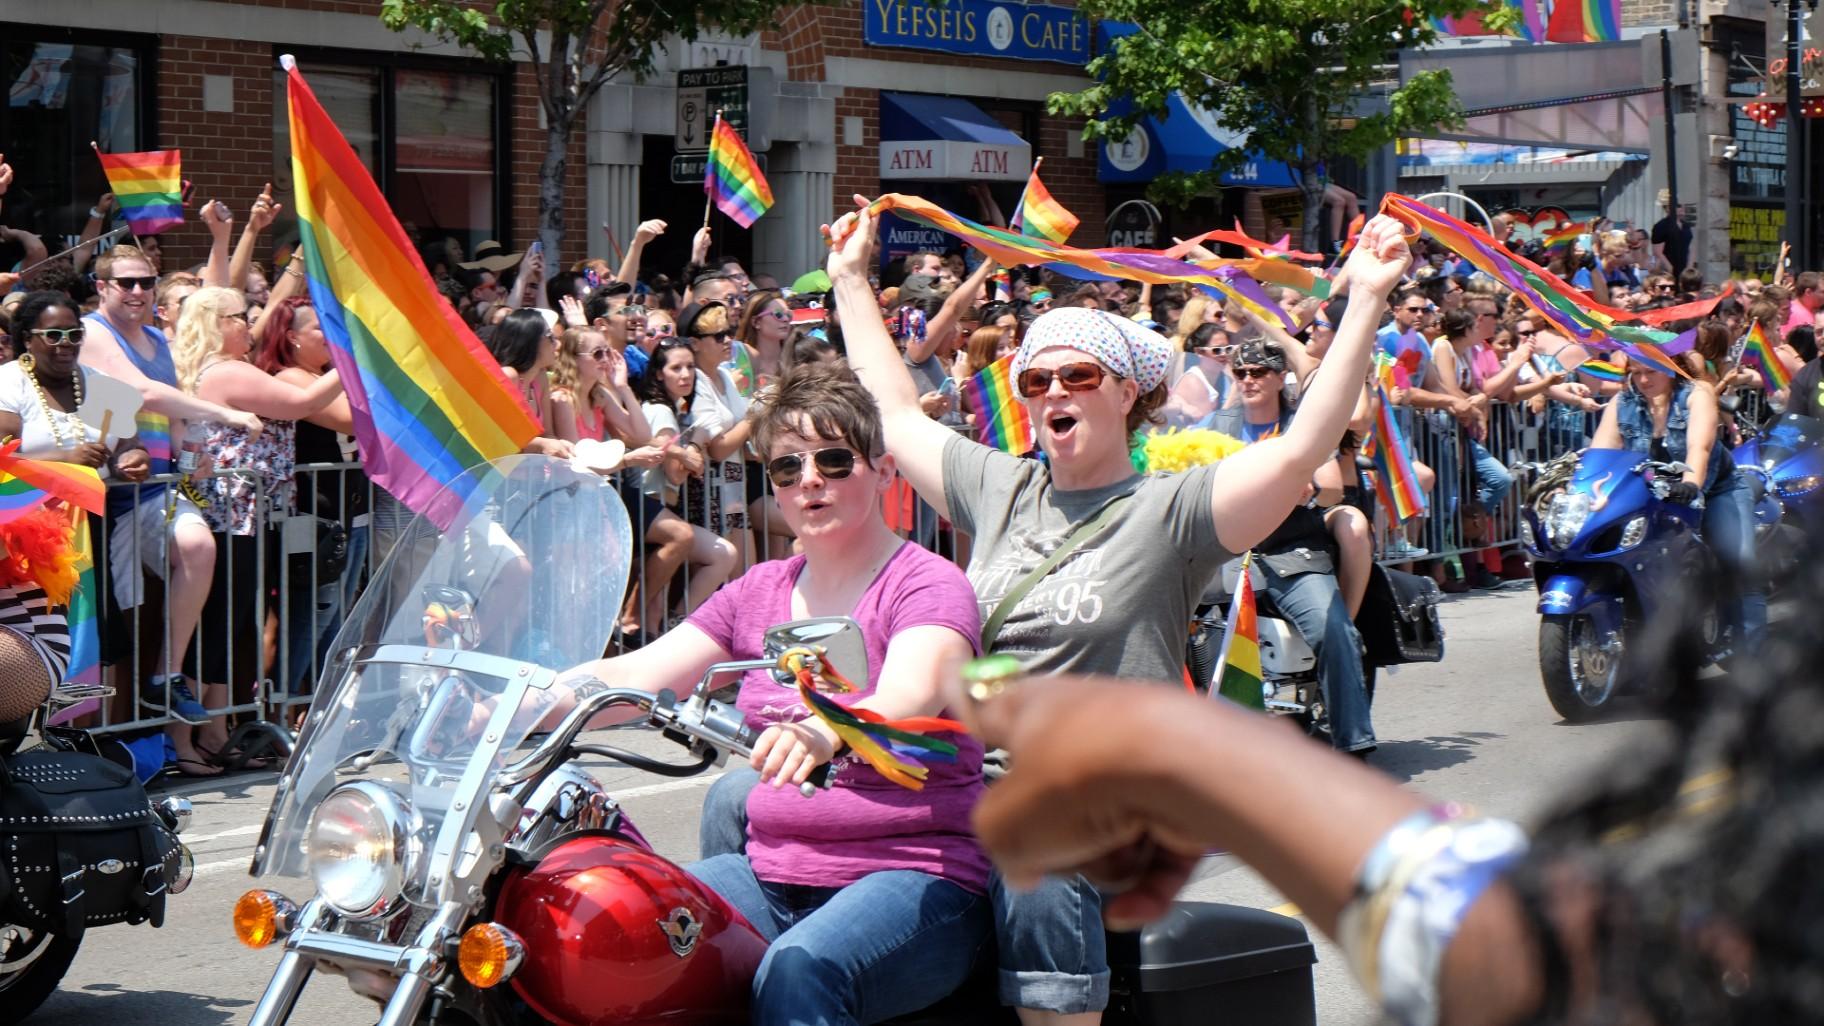 5 Things to Do This Weekend Chicago Pride Parade, House Music Festival